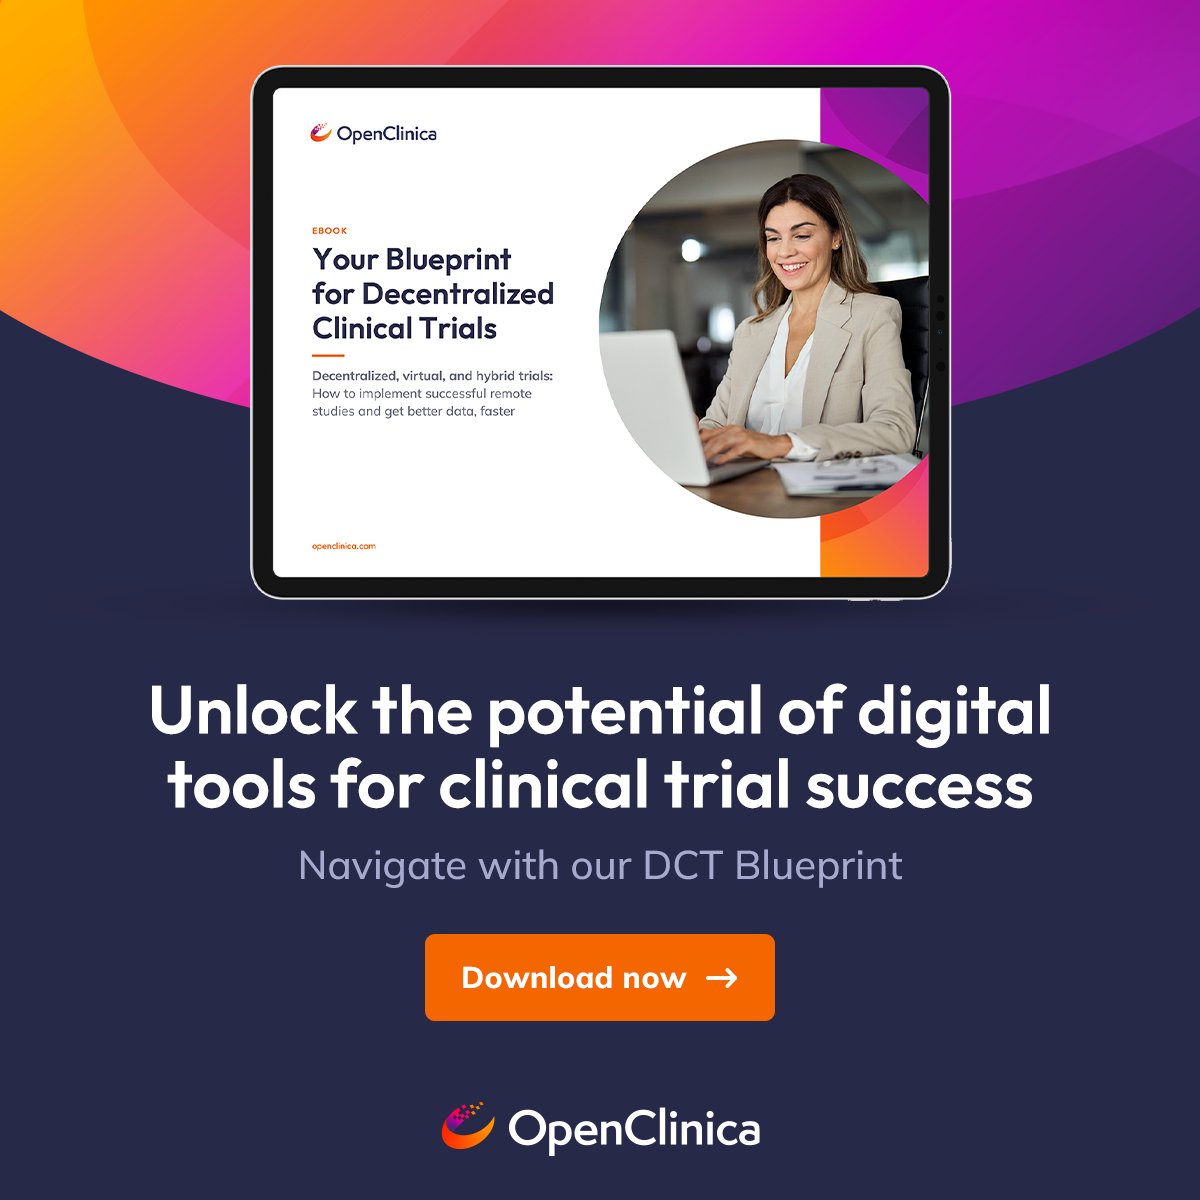 Explore innovative strategies and best practices to enhance the patient experience. 

Our latest eBook delves into successful remote study implementation and ways to elevate your clinical trials.

Access it here: bit.ly/3SGeh6o

#DCTs #ClinicalTrials #PtExp